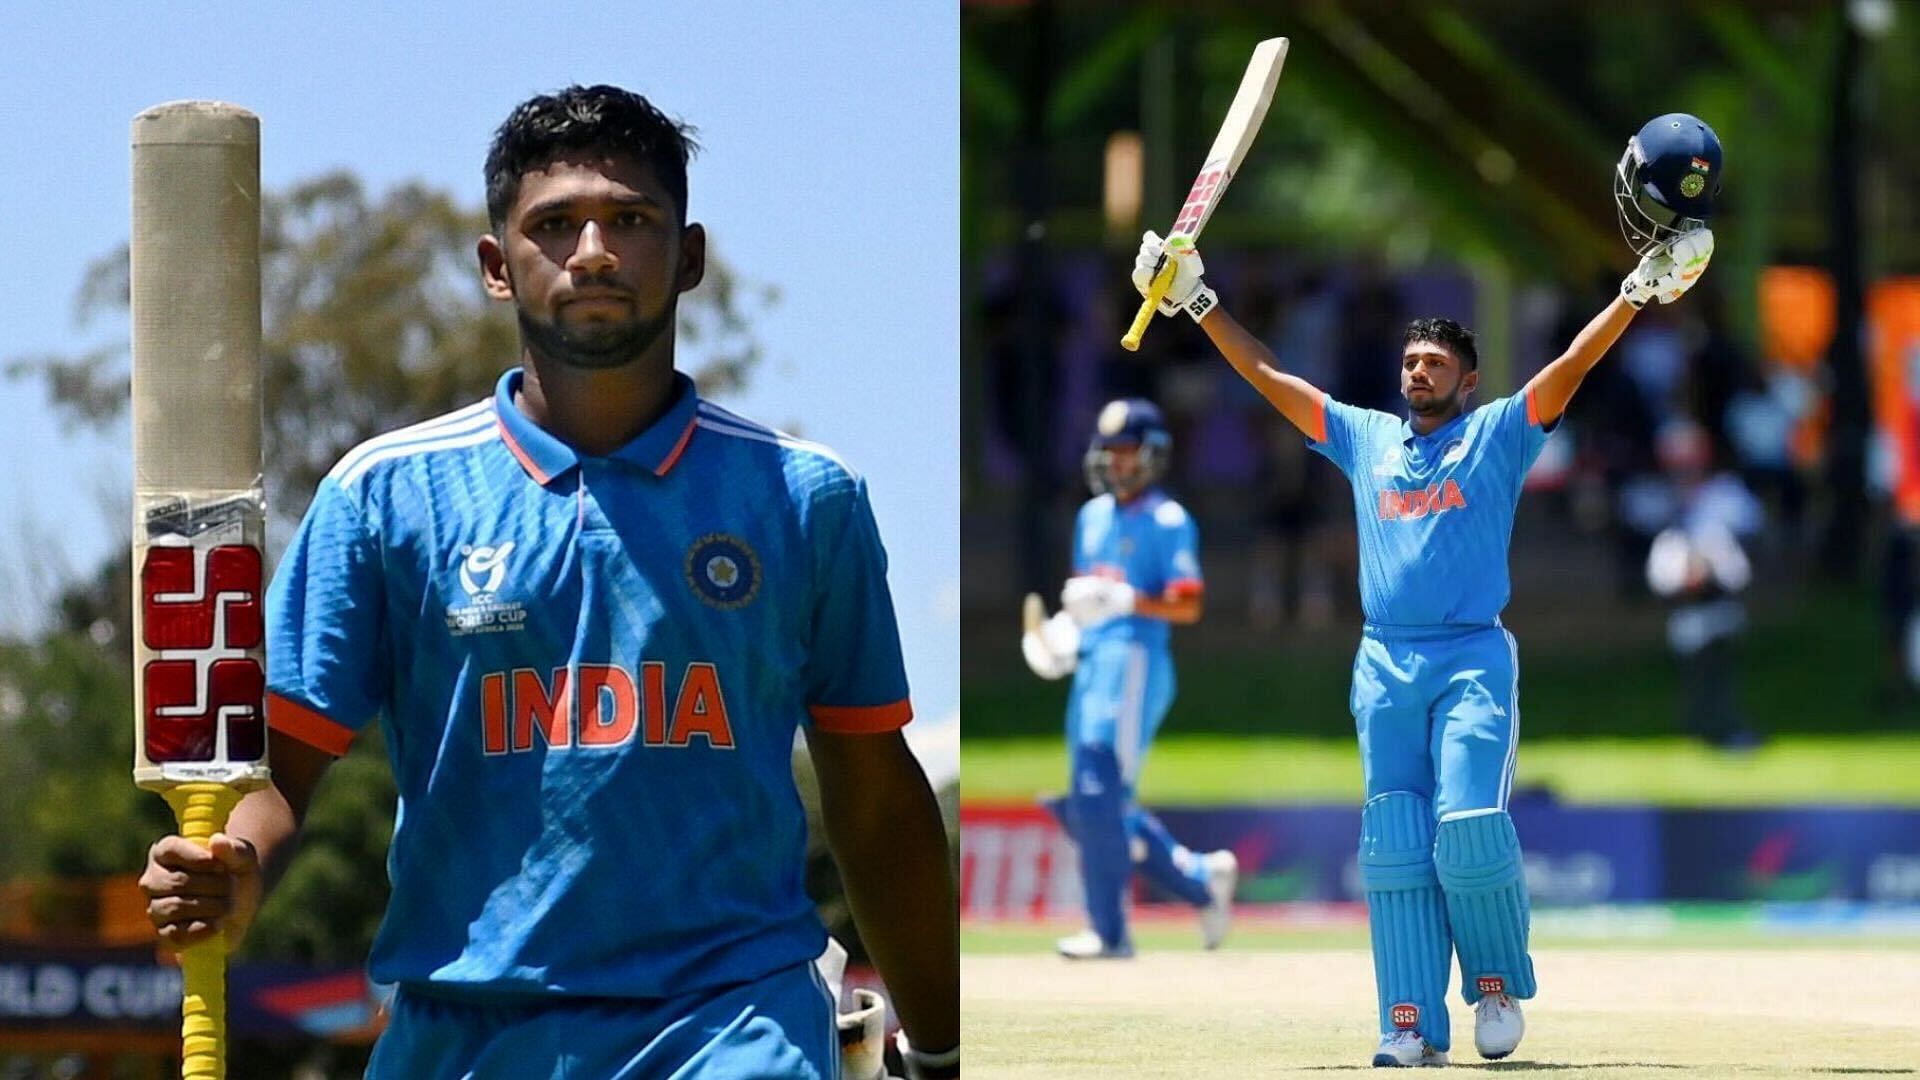 Musheer Khan, brother of Indian cricketer Sarfaraz Khan has stated that he is not too disappointed in not being able to land an IPL contract ahead of the upcoming season.